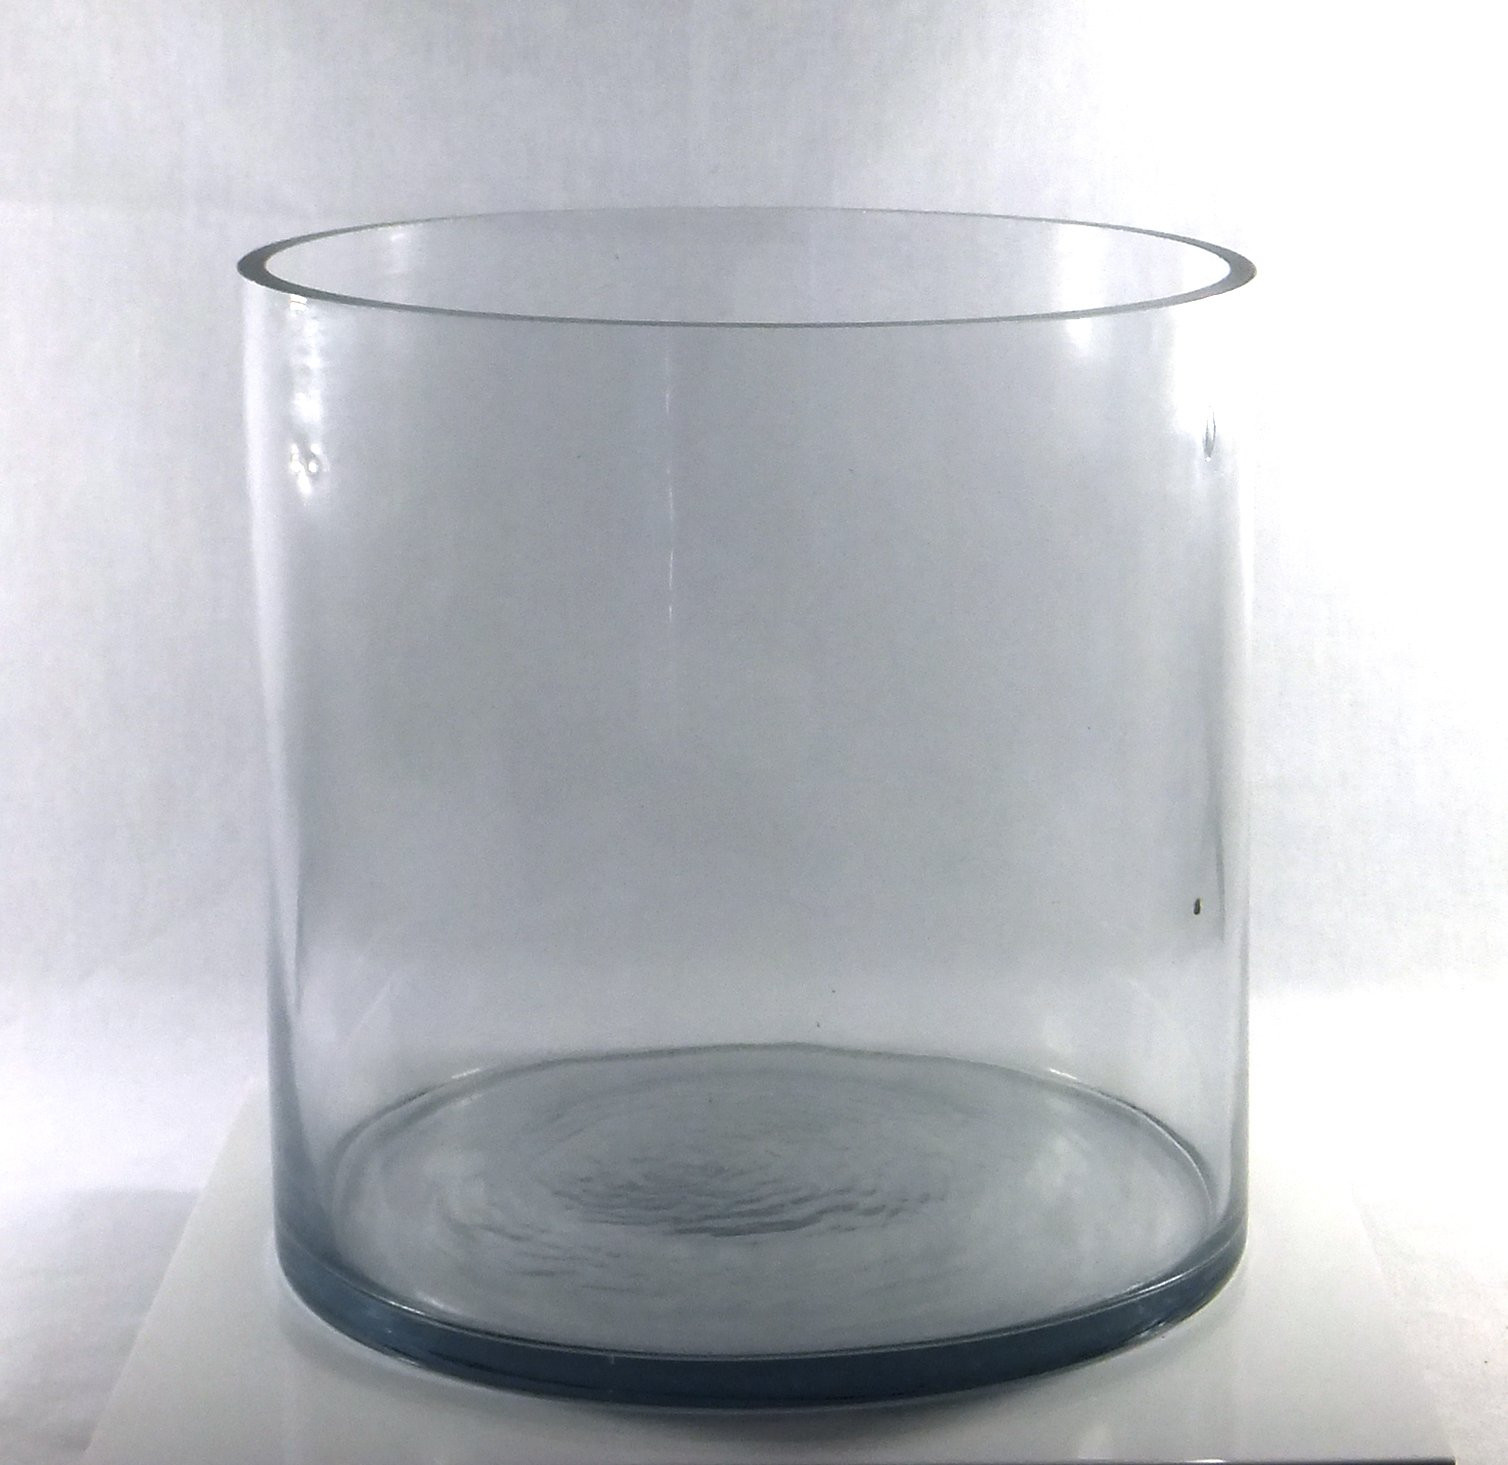 15 Elegant Clear Round Glass Vases wholesale 2024 free download clear round glass vases wholesale of buy 8 inch round large glass vase 8 clear cylinder oversize inside 8 inch round large glass vase 8 clear cylinder oversize centerpiece 8x8